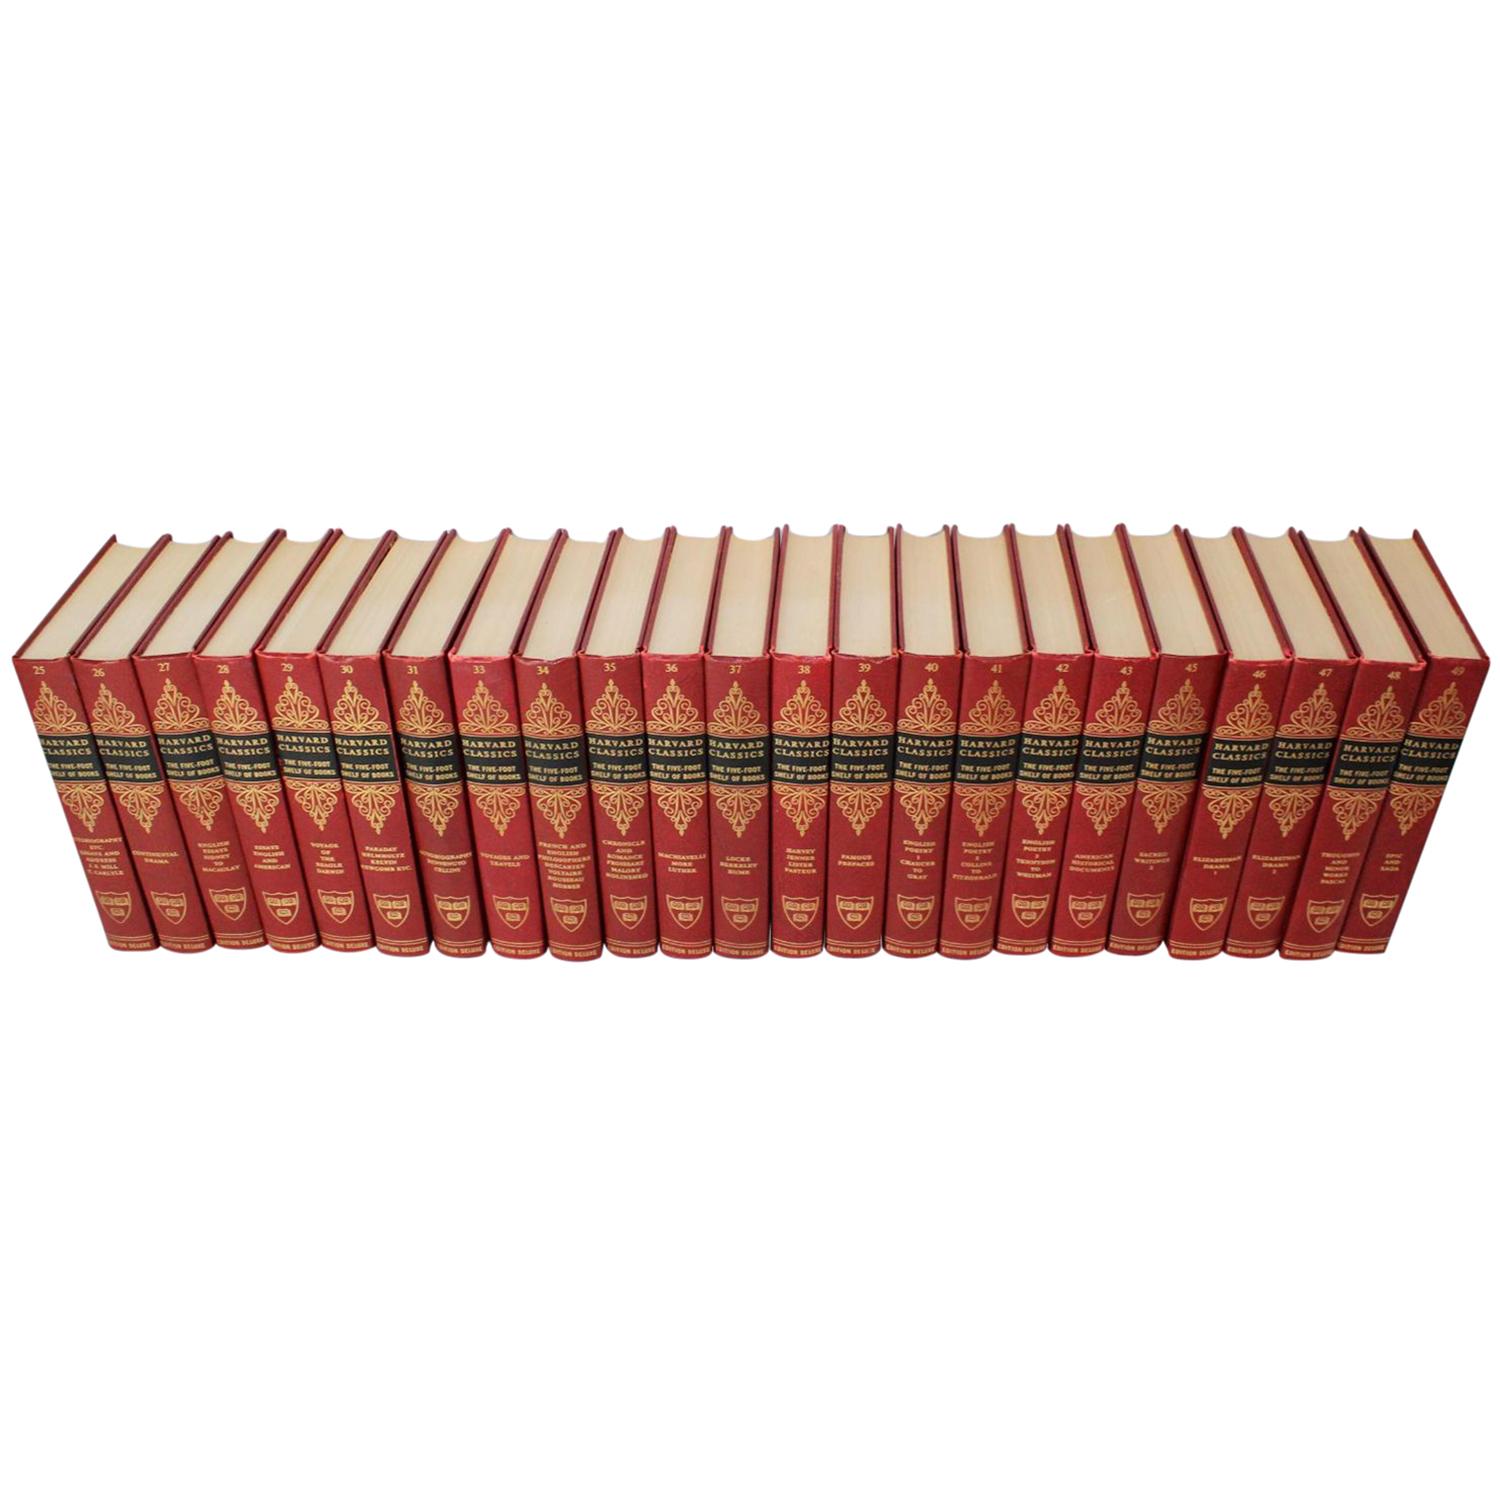 A vintage Mid-Century Modern American collection of twenty five volumes Deluxe Edition Harvard Classics books, covered in red, green leather in good condition. Wear consistent with age and use. Copyright 1937 by P.F. Collier & Son Corporation,